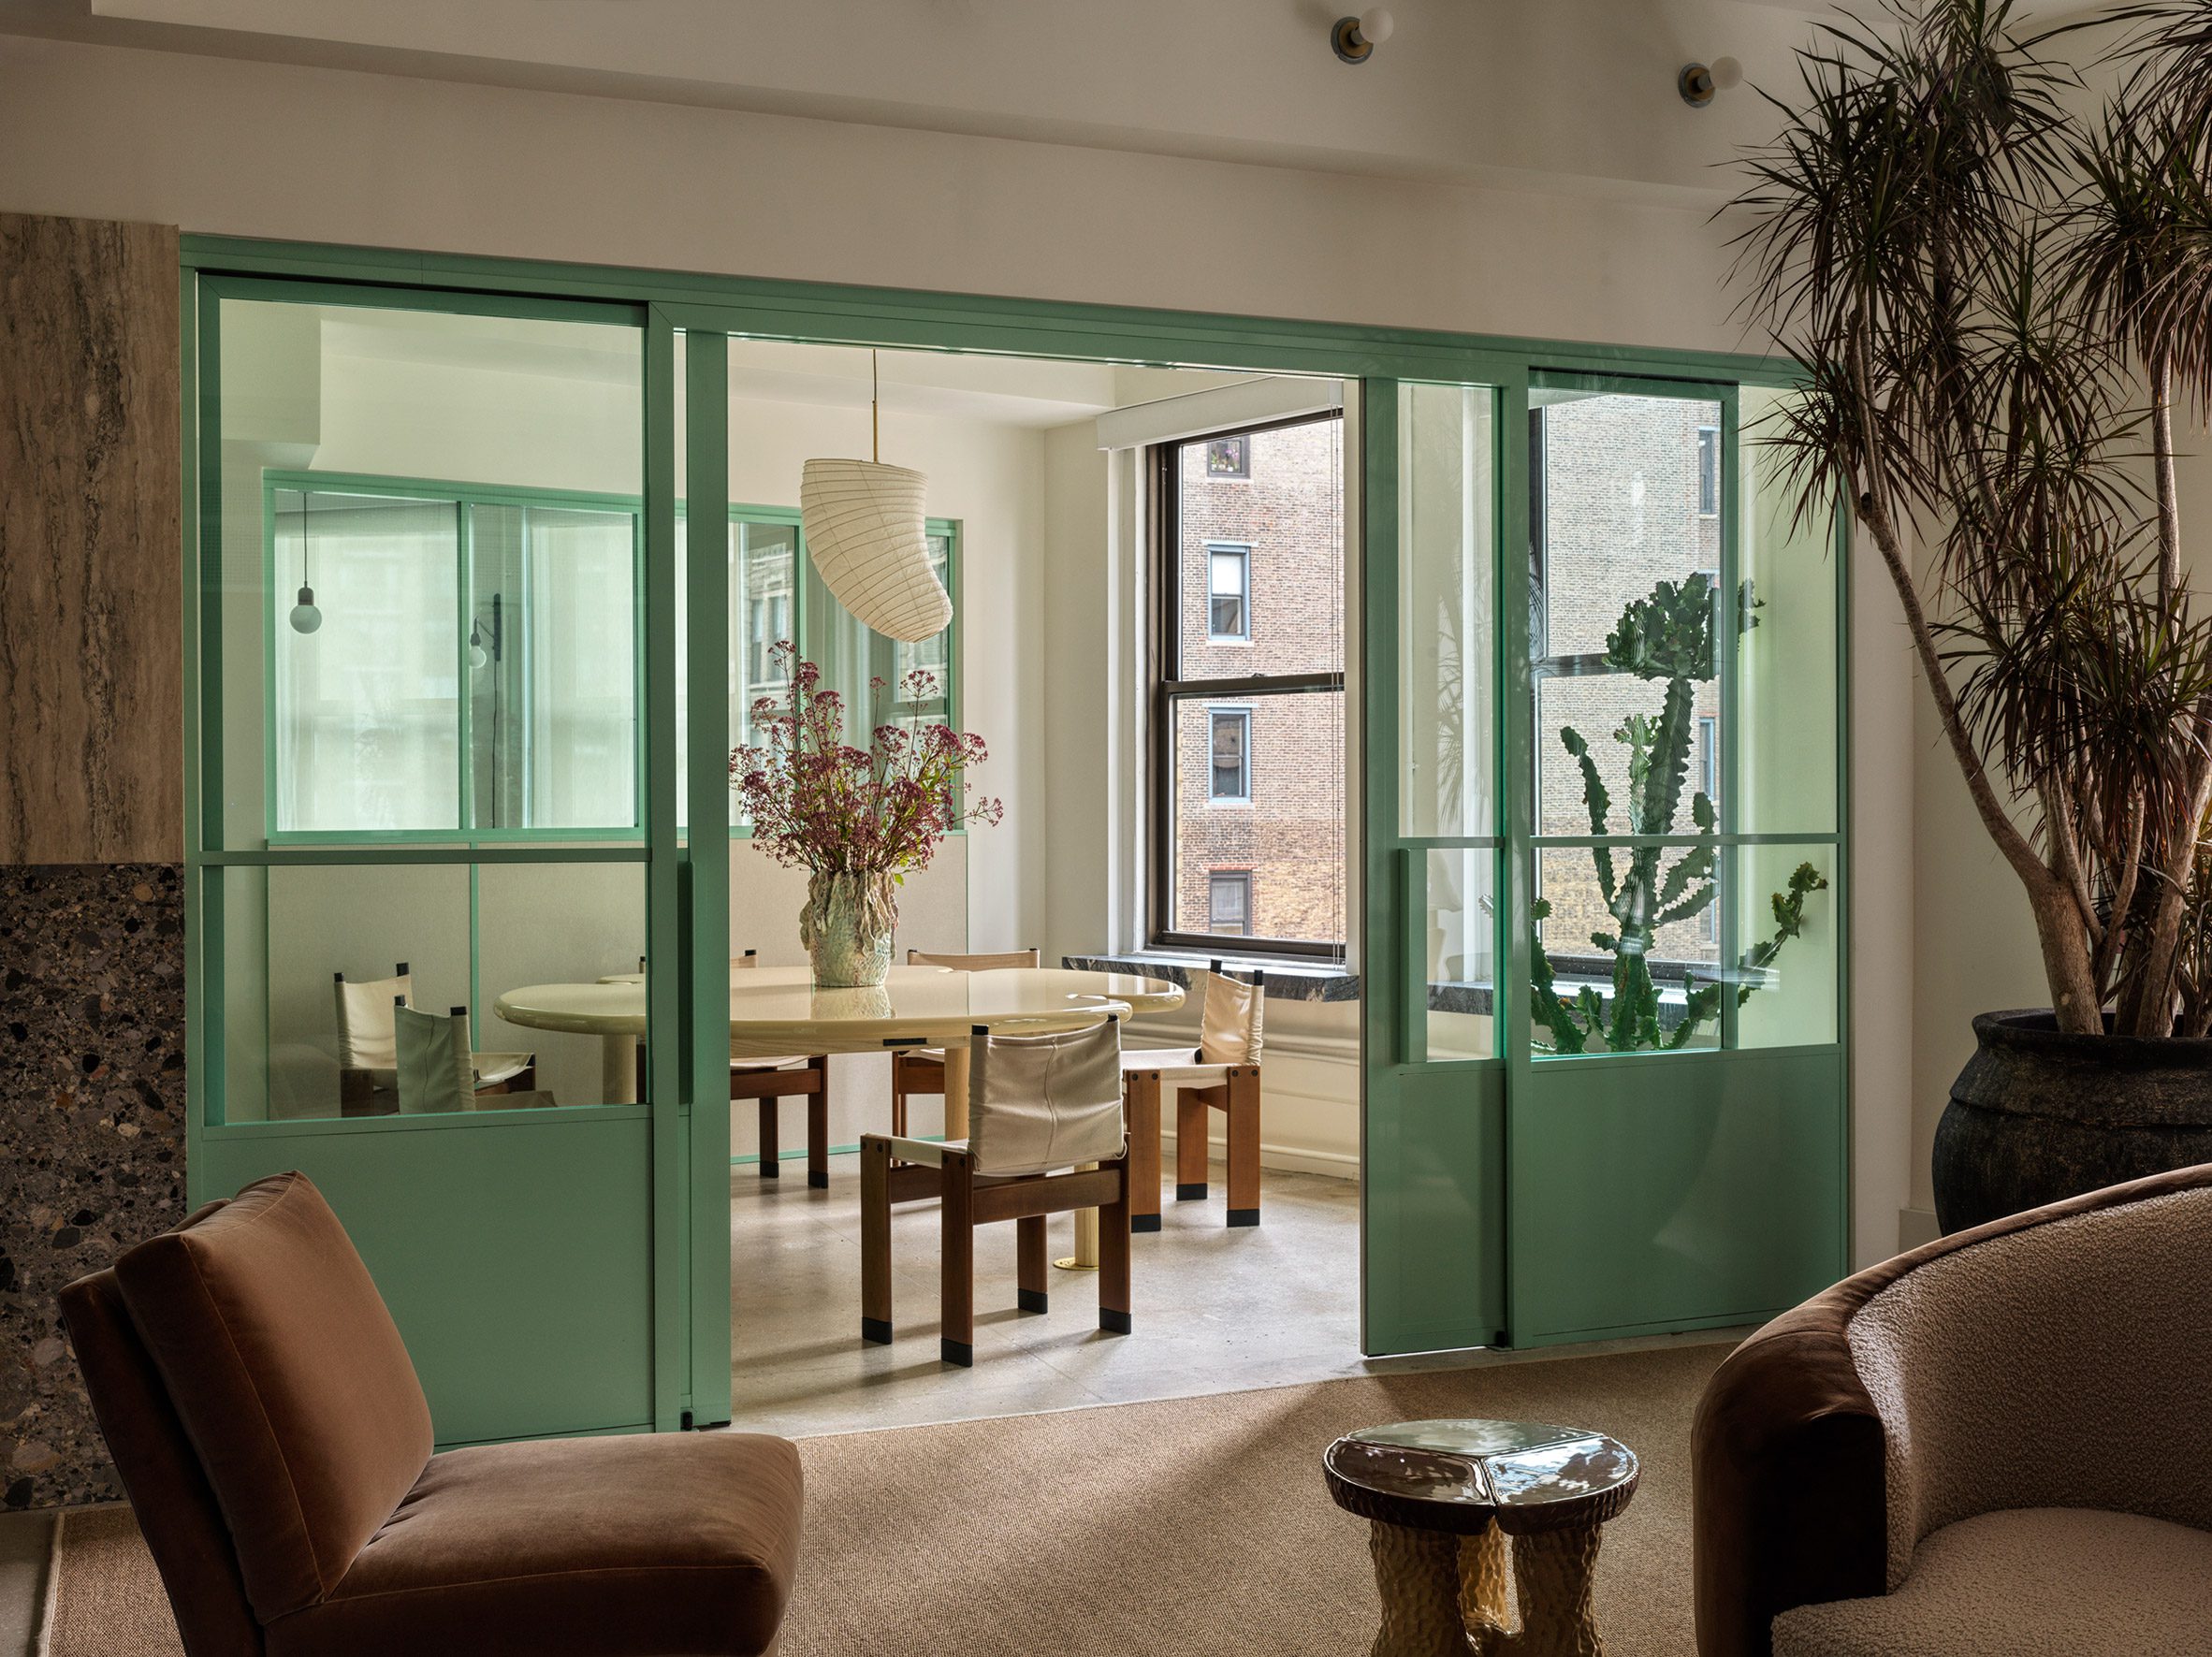 Office reception with meeting room visible through glass and mint green sliding doors